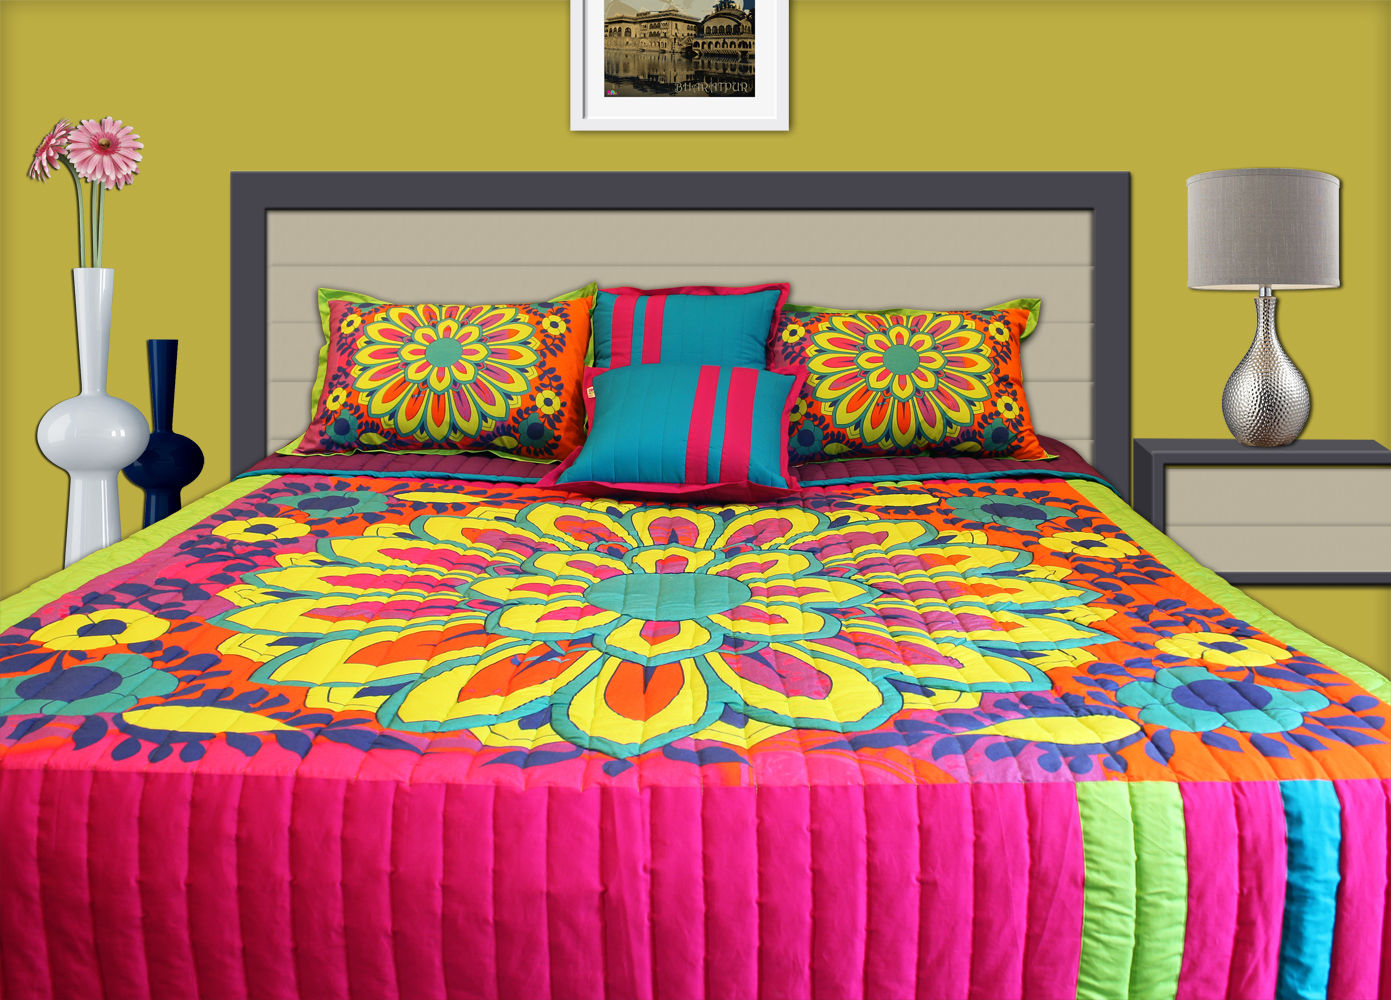 Big Flower Motif King Size Quilted Bedspread homify Modern Bedroom Cotton Red Textiles